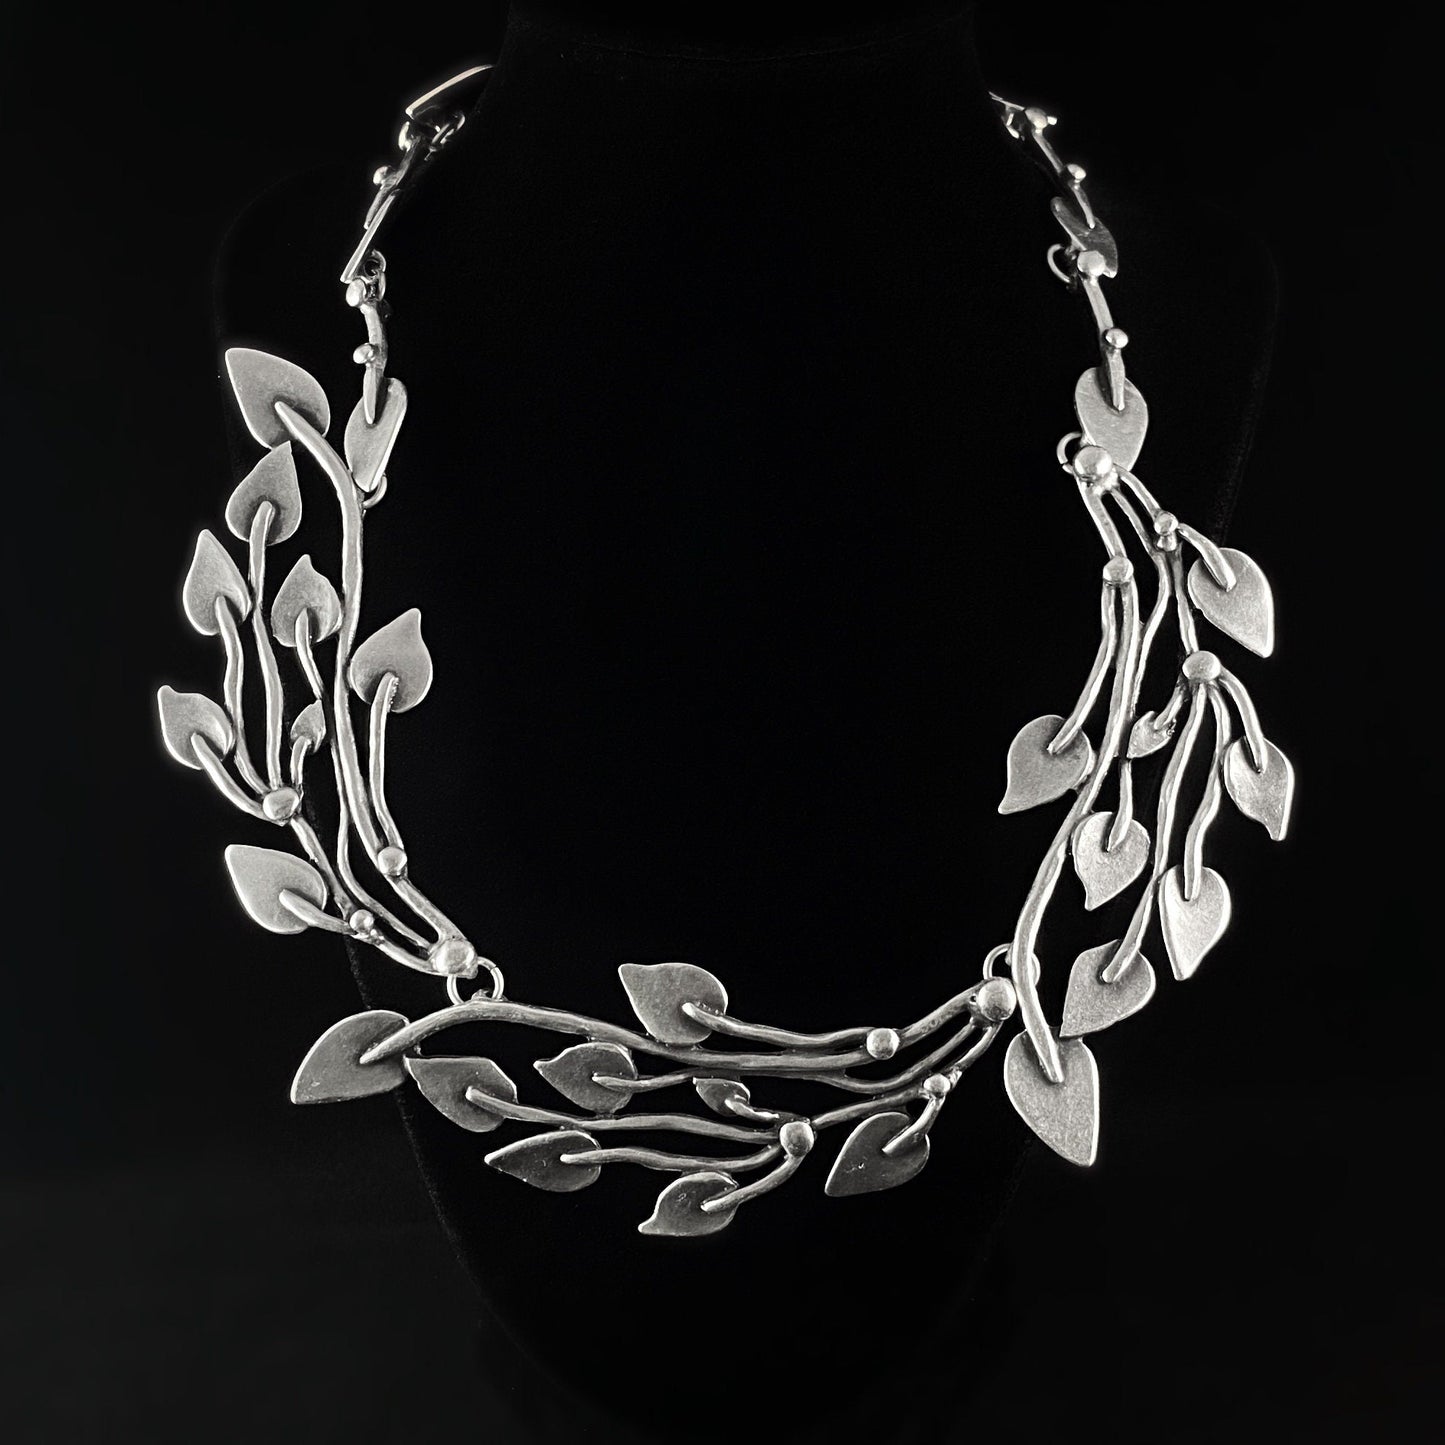 Chunky Silver Leaf Motif Statement Necklace - Handmade, Nickel Free